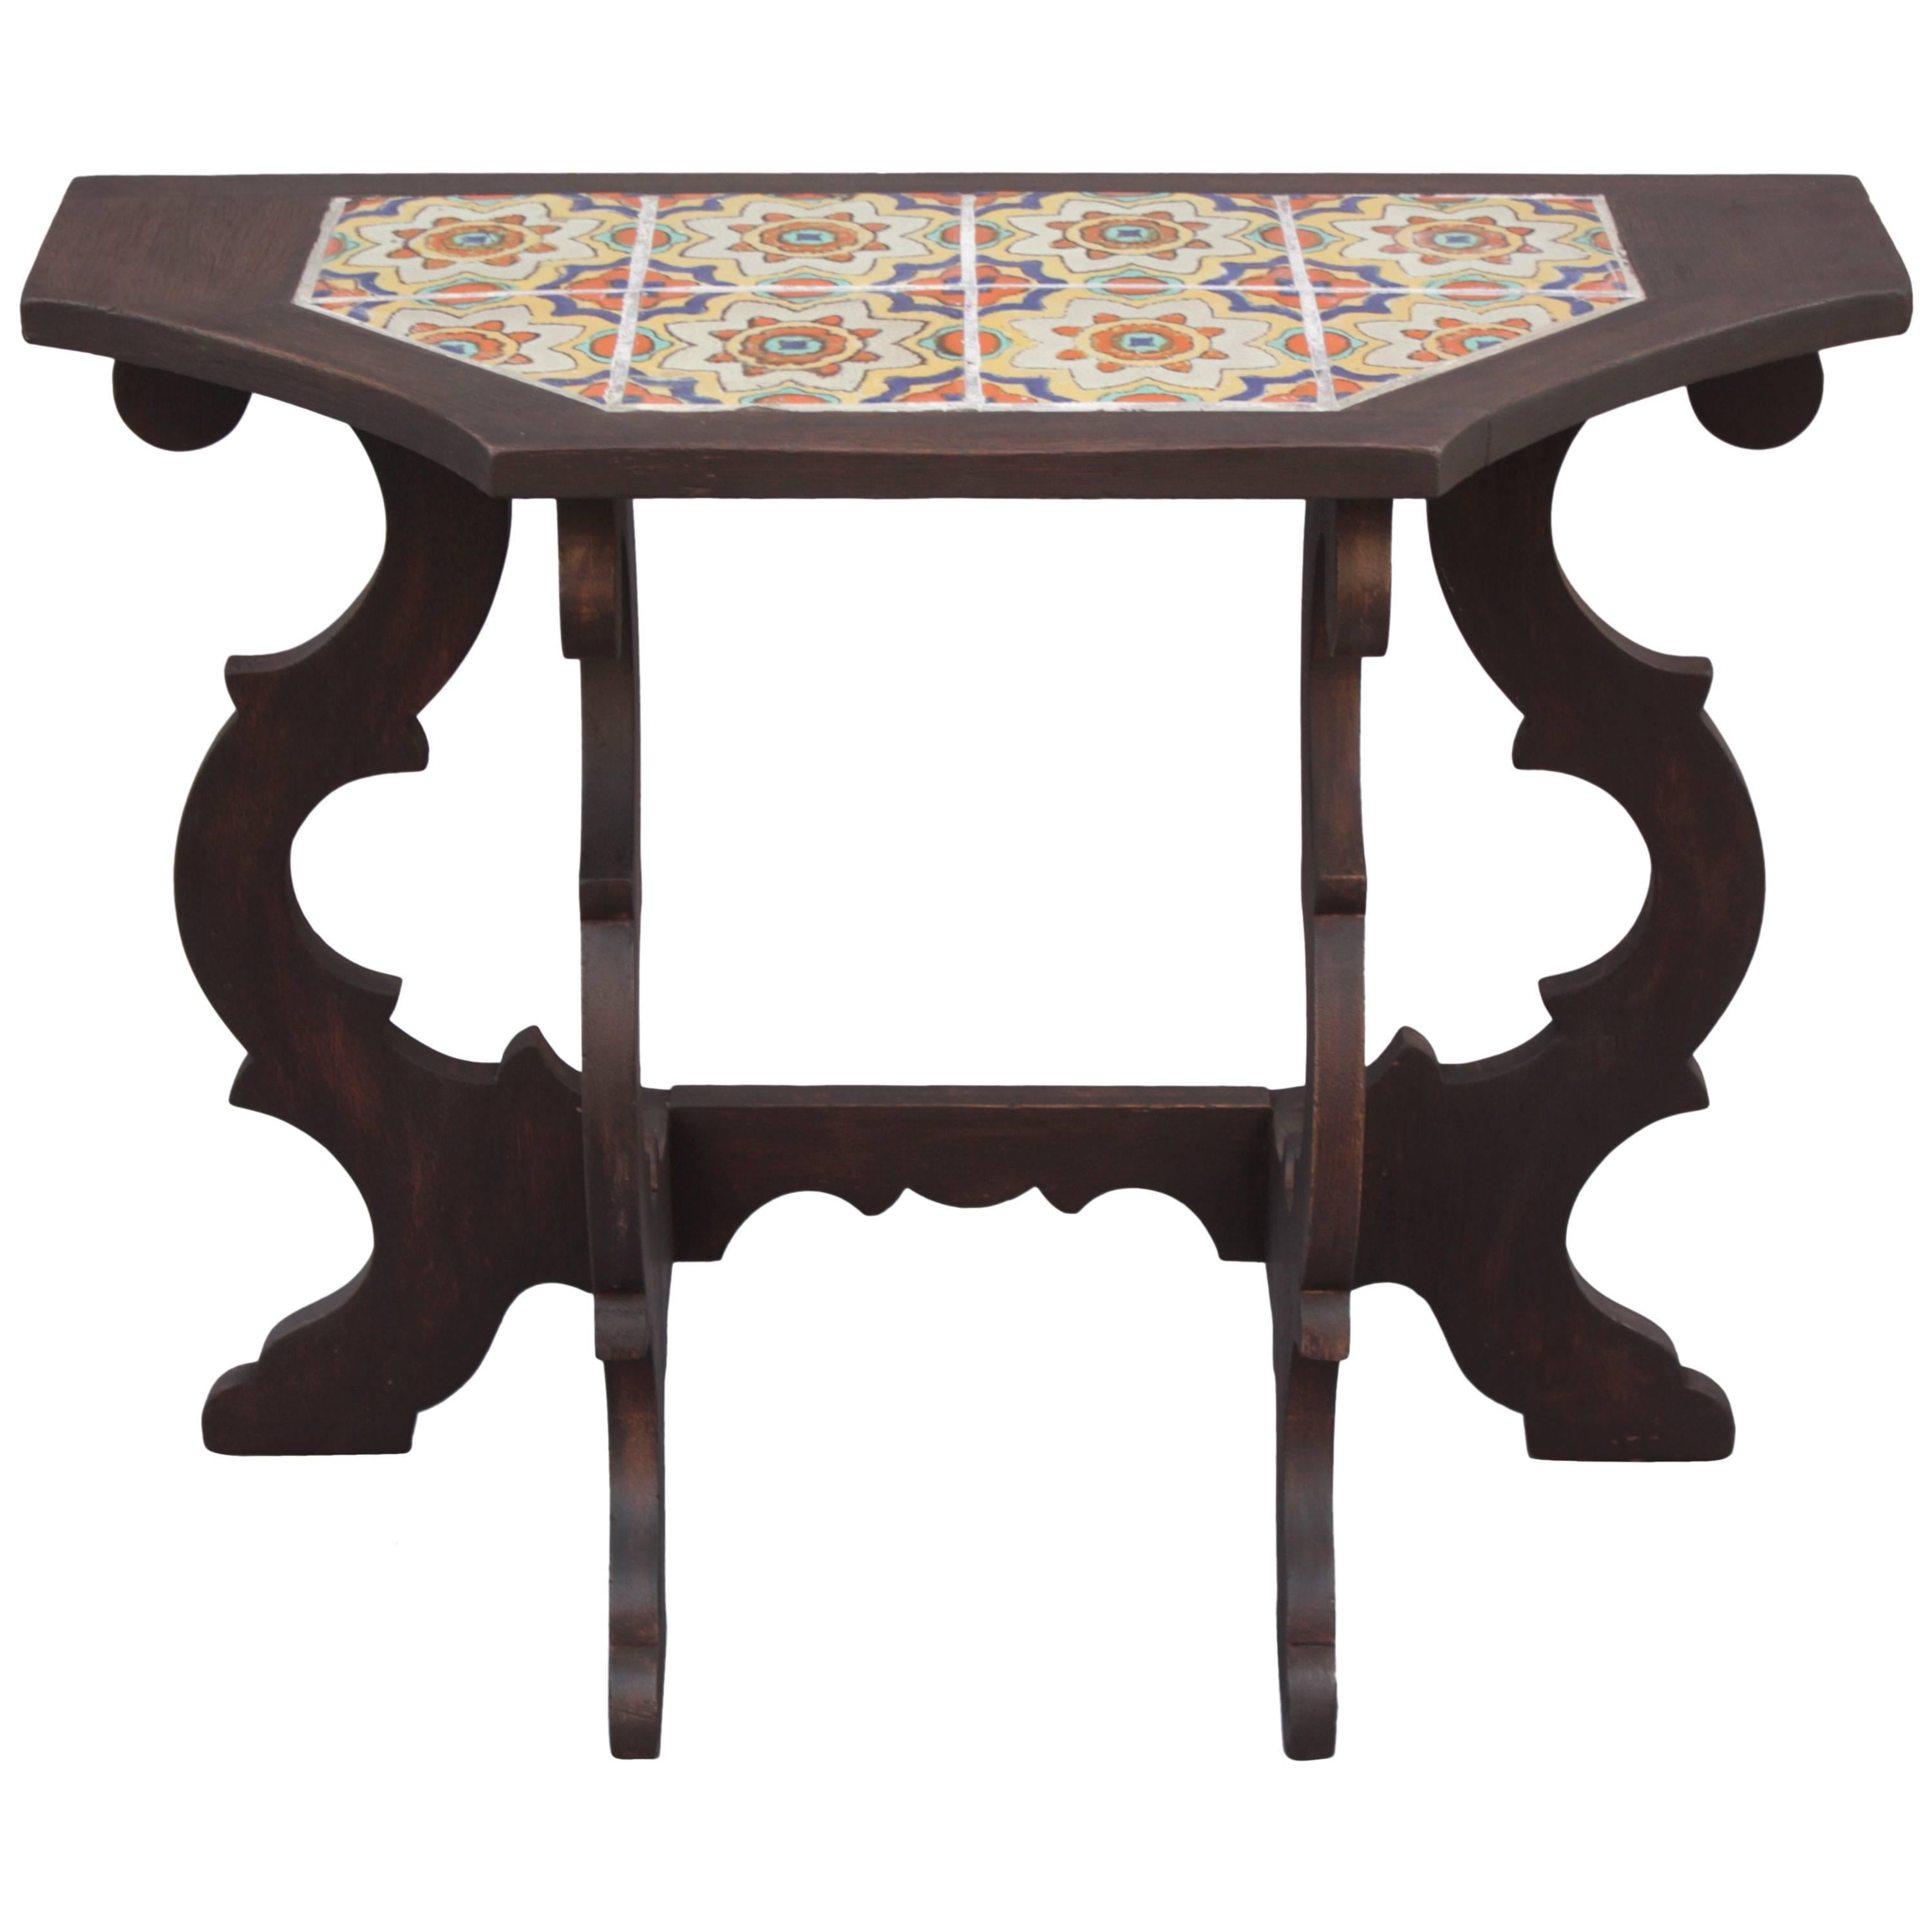 1930s Spanish Revival Table with Tudor Tiles